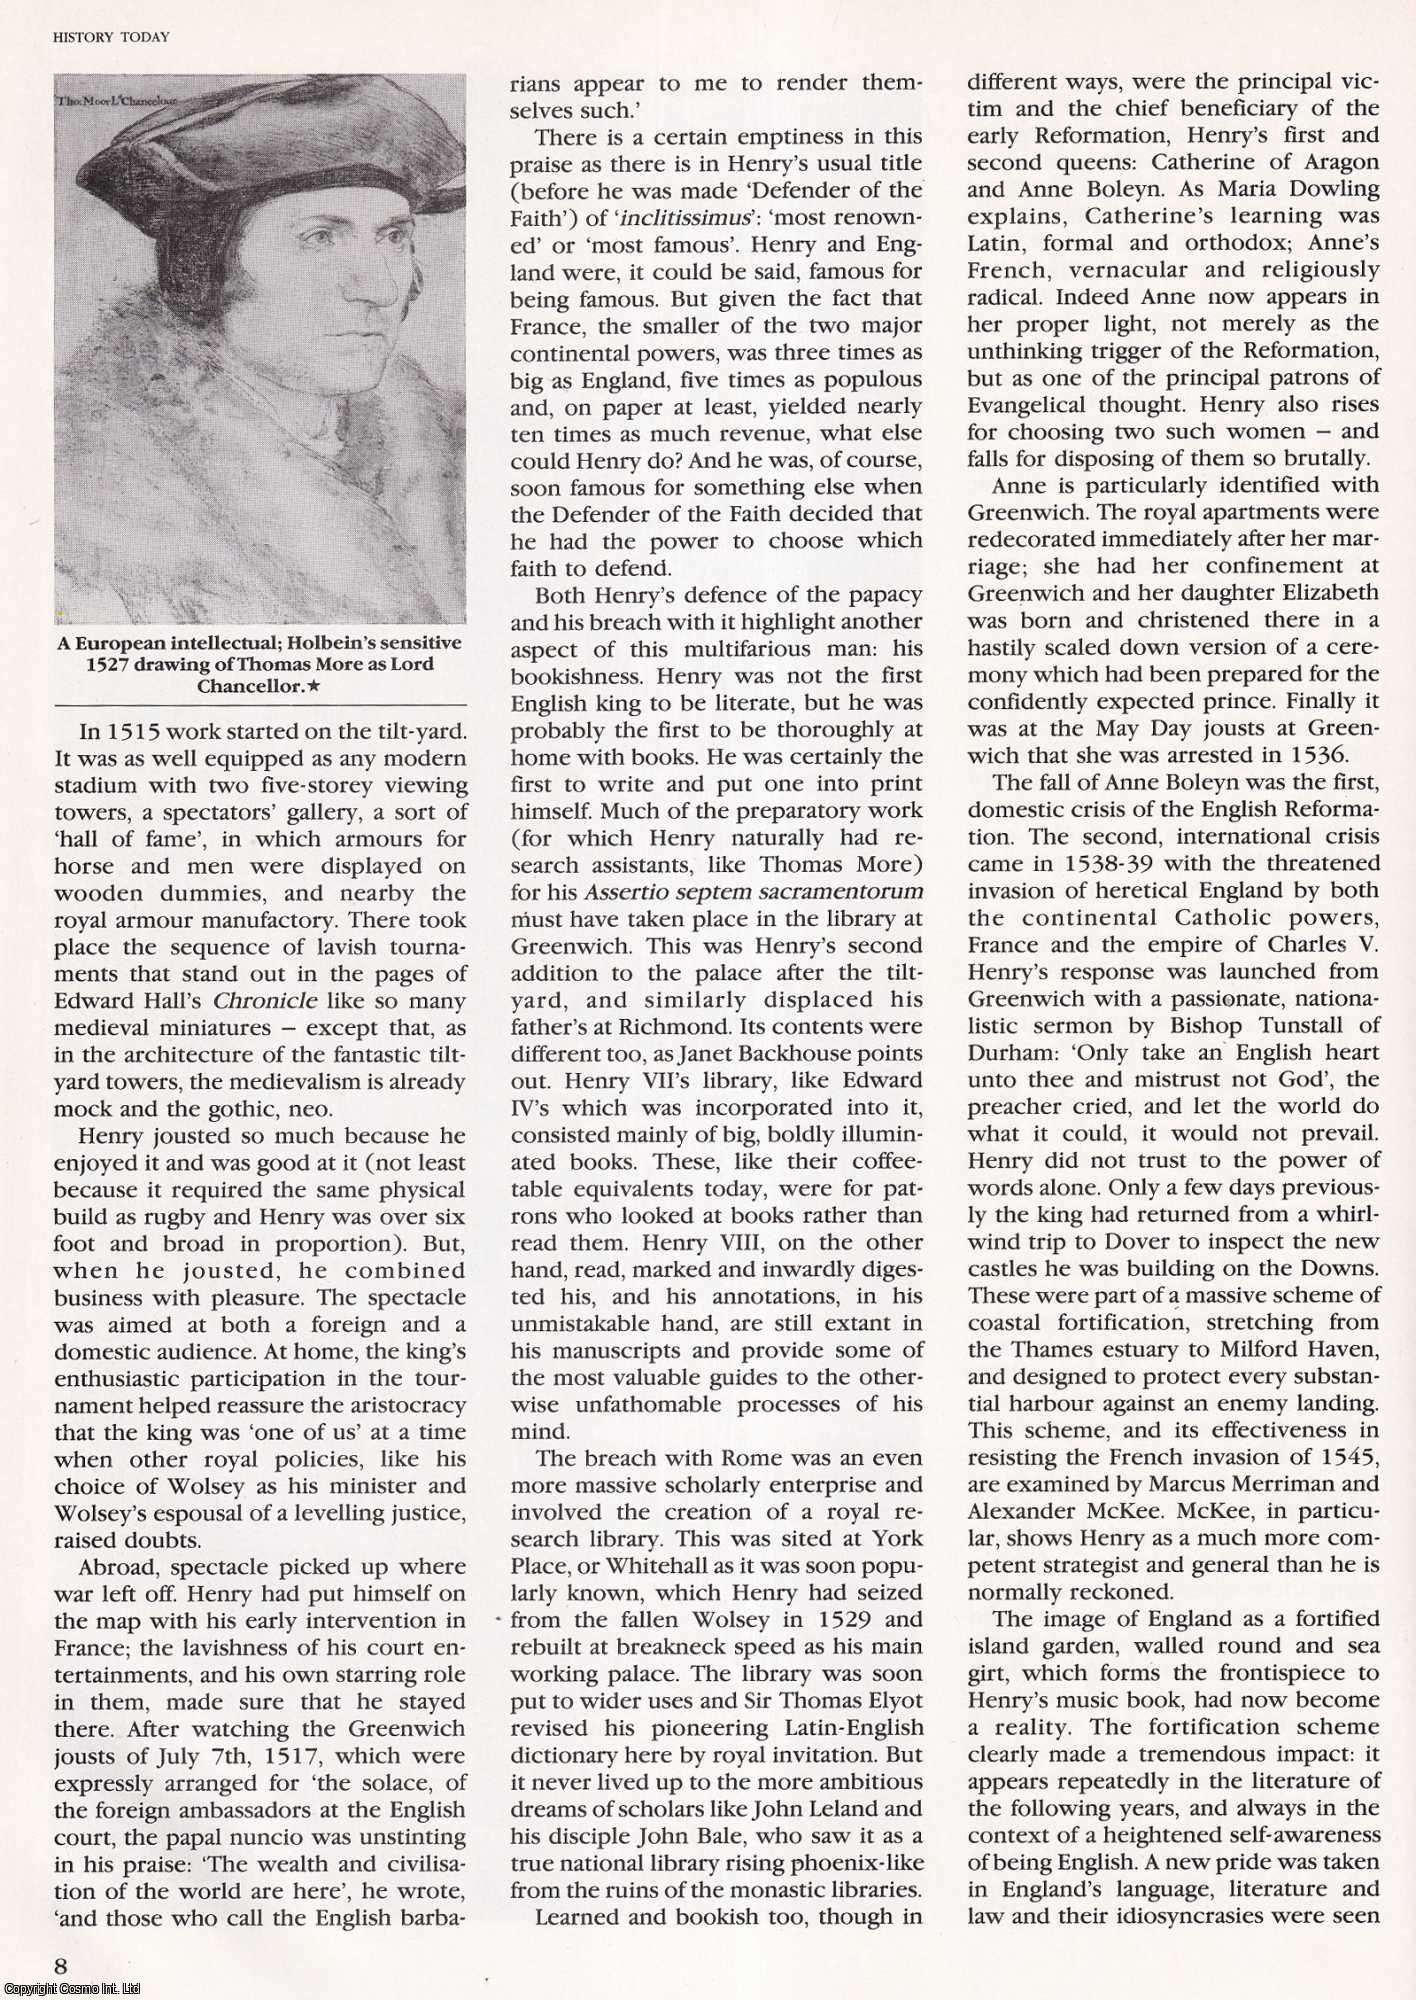 David Starkey - Destruction and Renewal: An Introduction to Henry VIII. An original article from History Today, 1991.